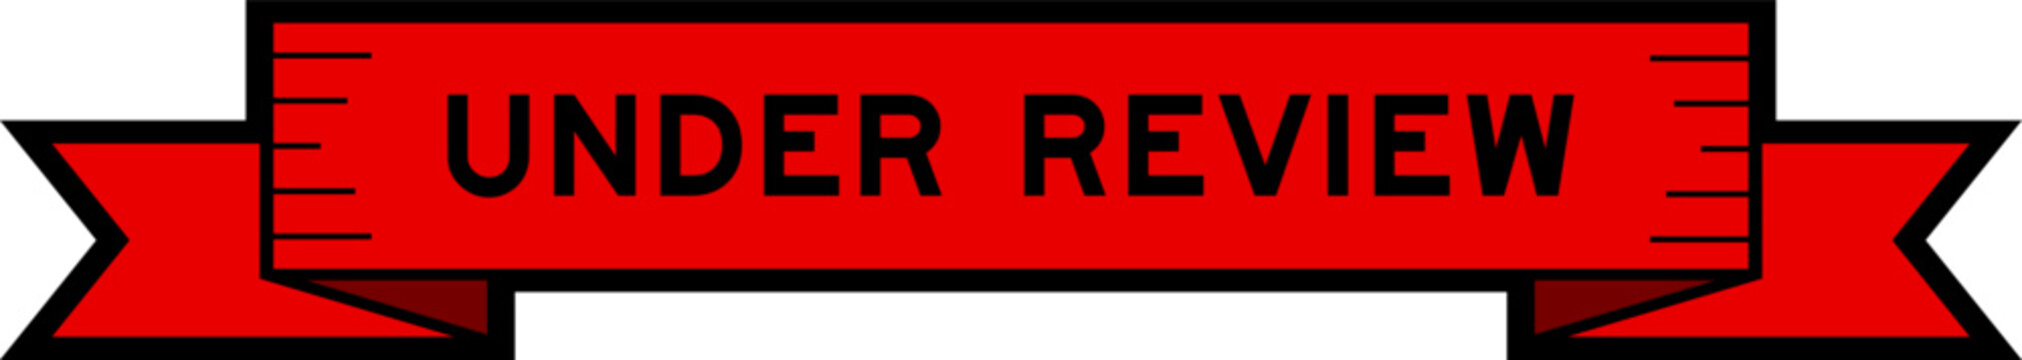 Ribbon label banner with word under review in red color on white background